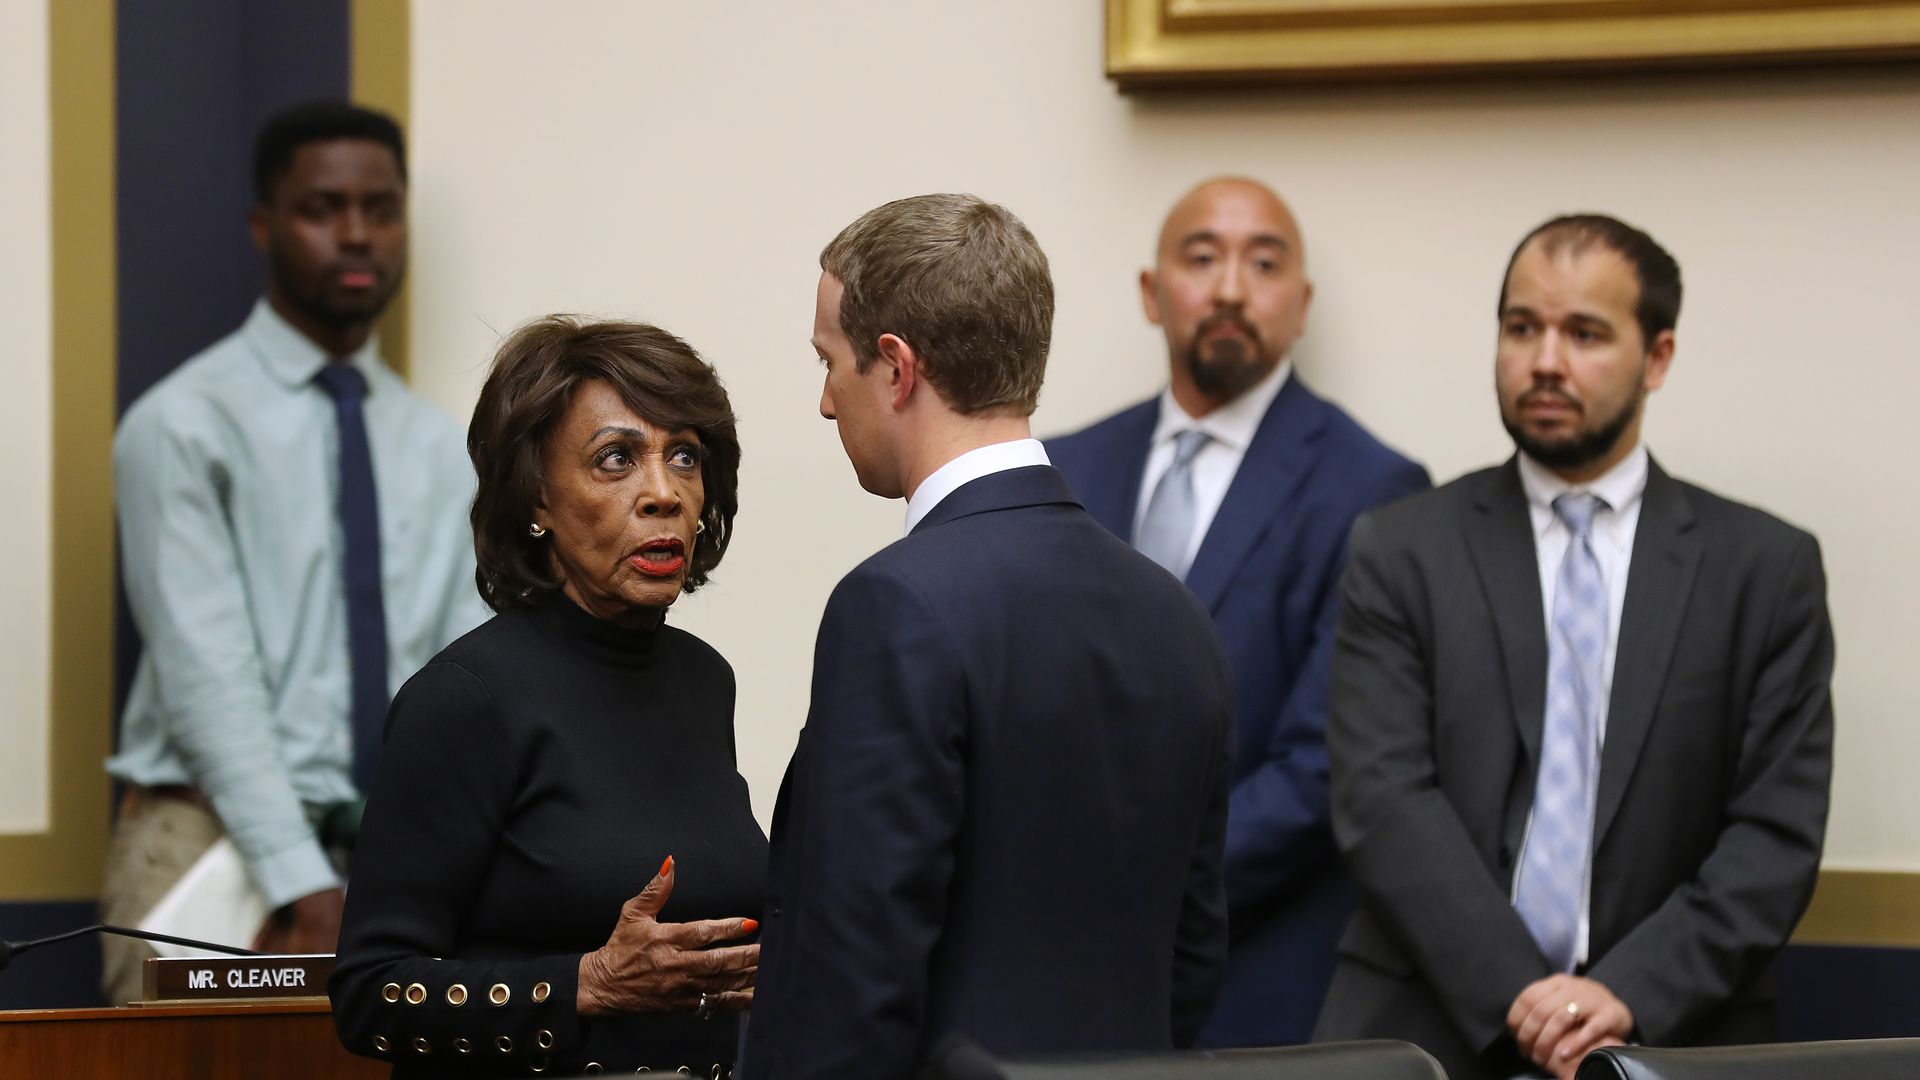 House Financial Services Committee Chair Maxine Waters (D-CA) talks with Facebook co-founder and CEO Mark Zuckerberg after he testified to the committee, October 23,2019.